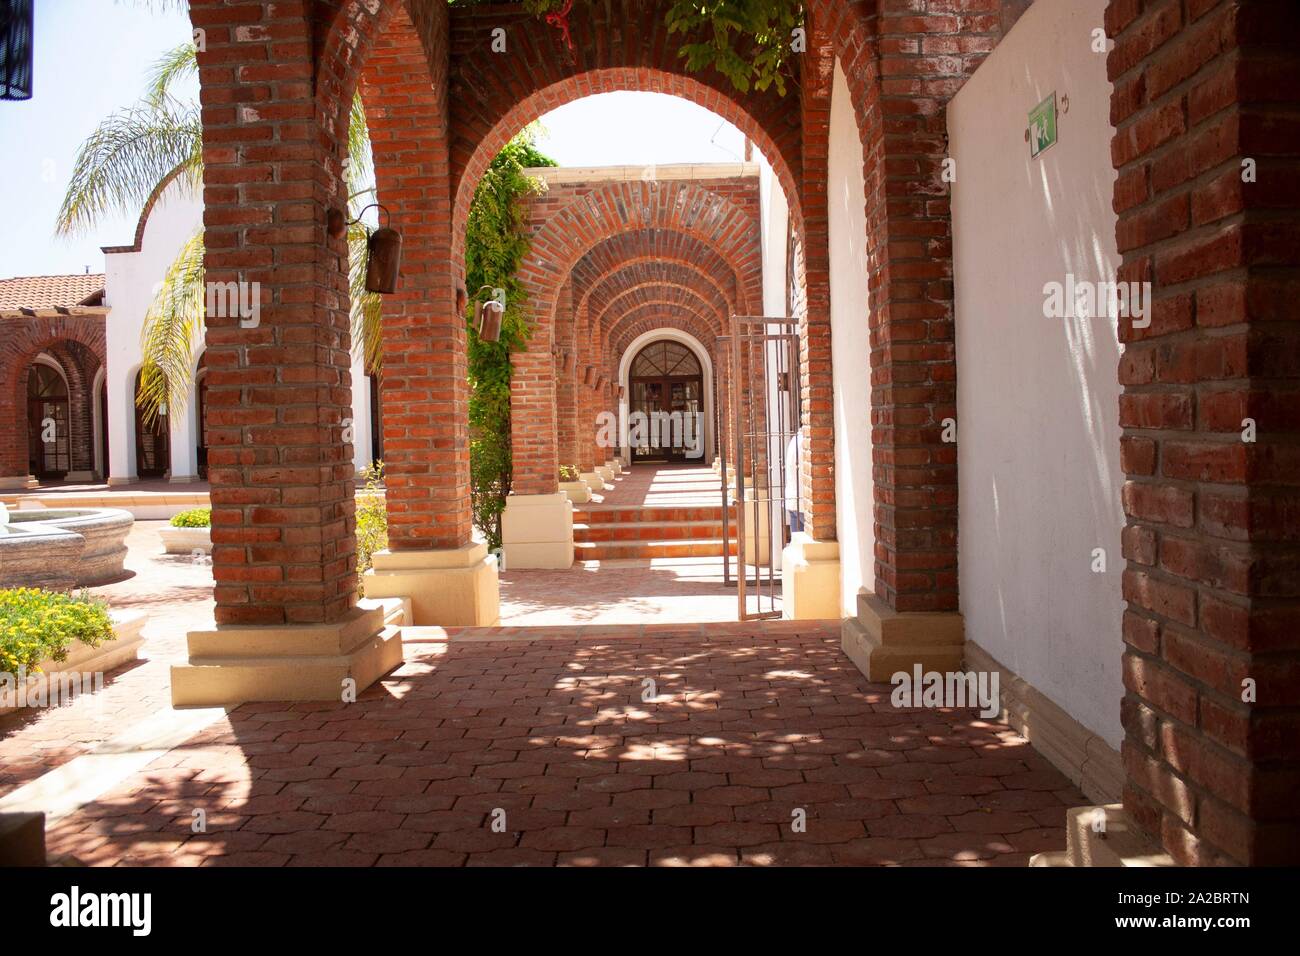 outdoors arches and columns of red bricks in the outskirts of the city of Baja California Mexico. Stock Photo